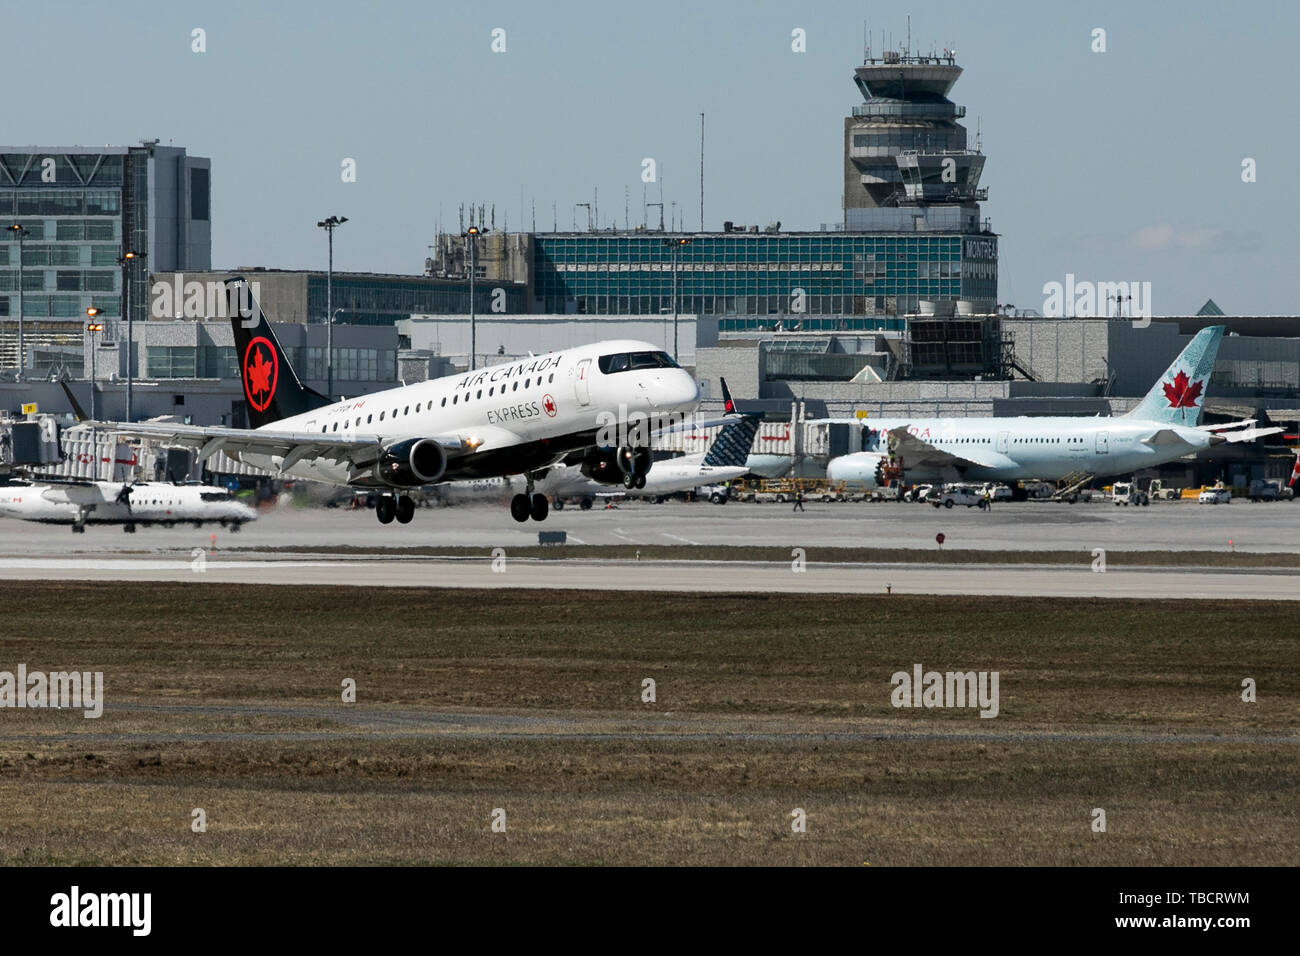 A Air Canada Express Embraer ERJ170 airplane is seen landing at Montréal-Pierre Elliott Trudeau International Airport in Montreal, Quebec, Canada, on  Stock Photo